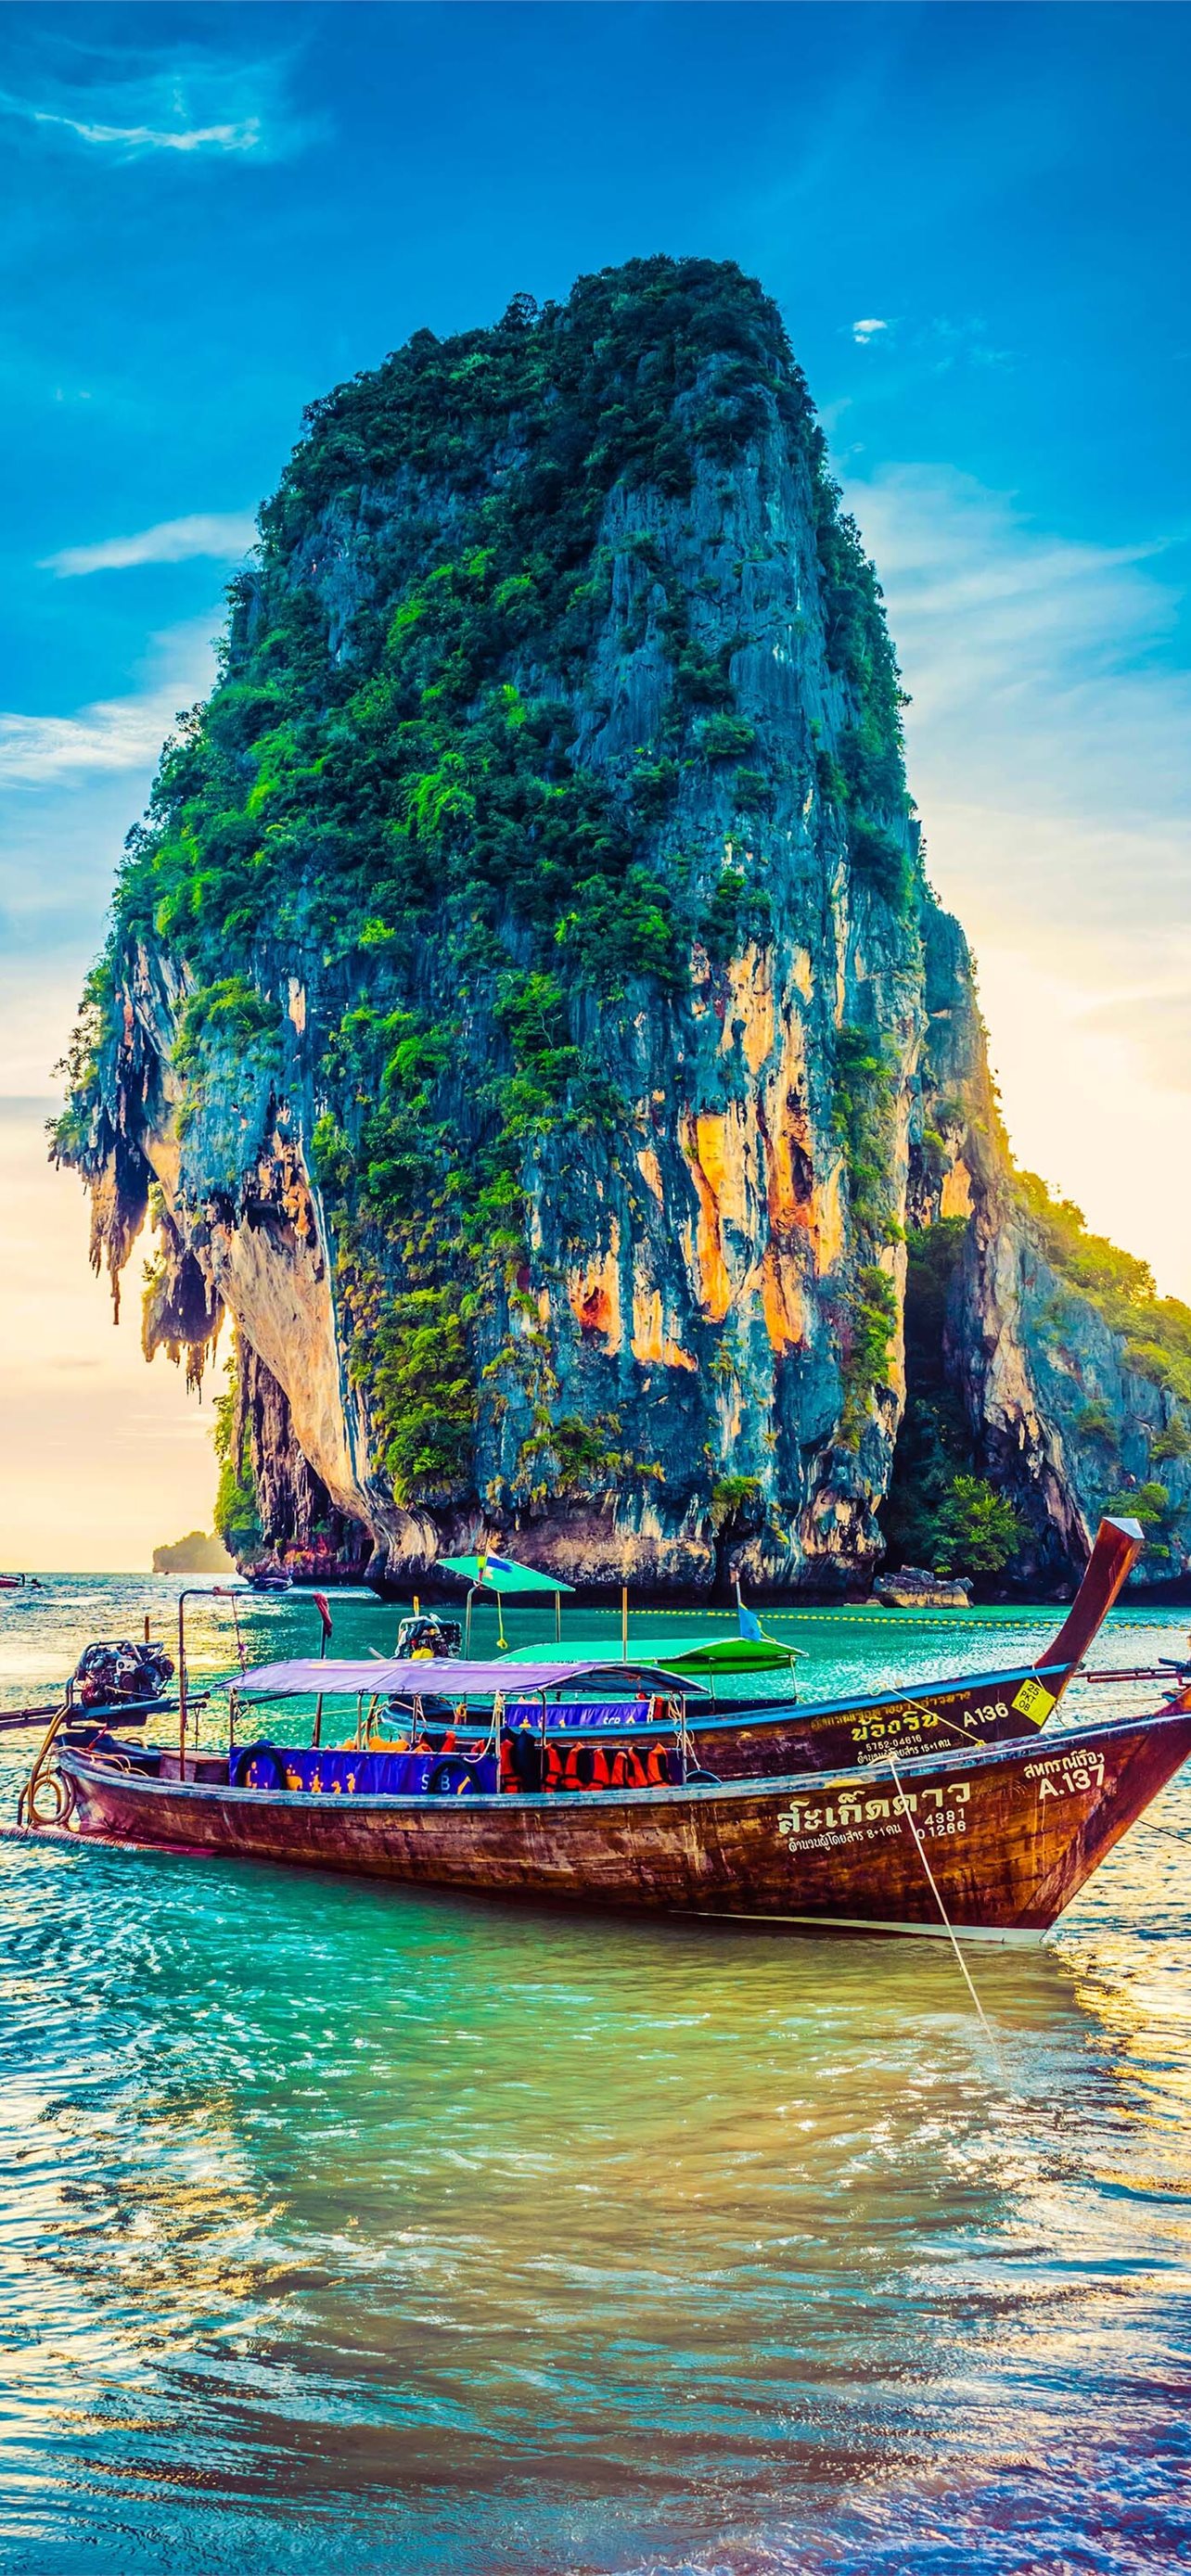 Thailand Iphone Wallpapers